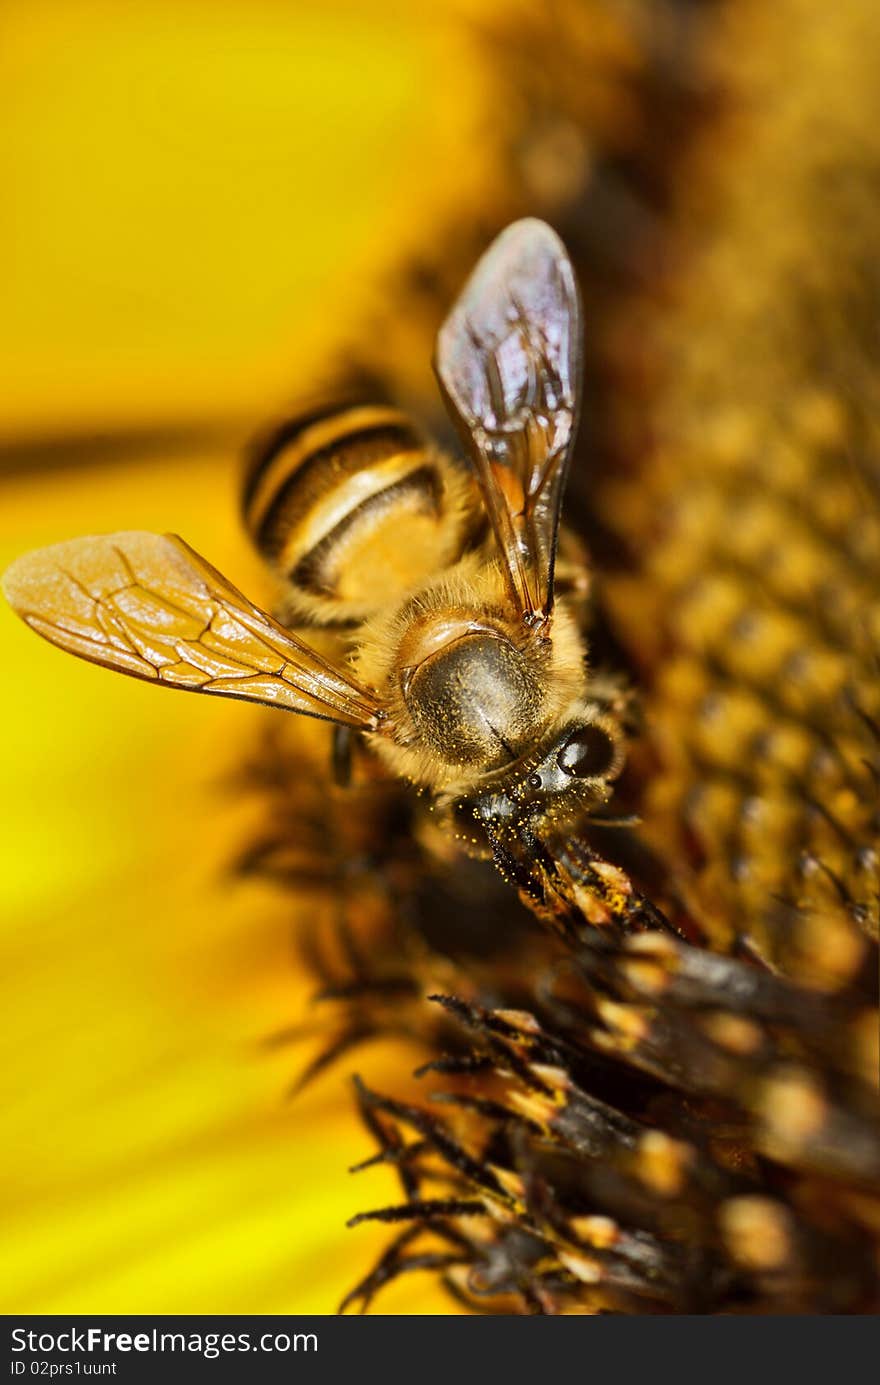 This image focused on the most of the important part of a bee, the eyes, furry body and the wing. The yellowish colour of background matched perfectly with the colour of bee. This image focused on the most of the important part of a bee, the eyes, furry body and the wing. The yellowish colour of background matched perfectly with the colour of bee.